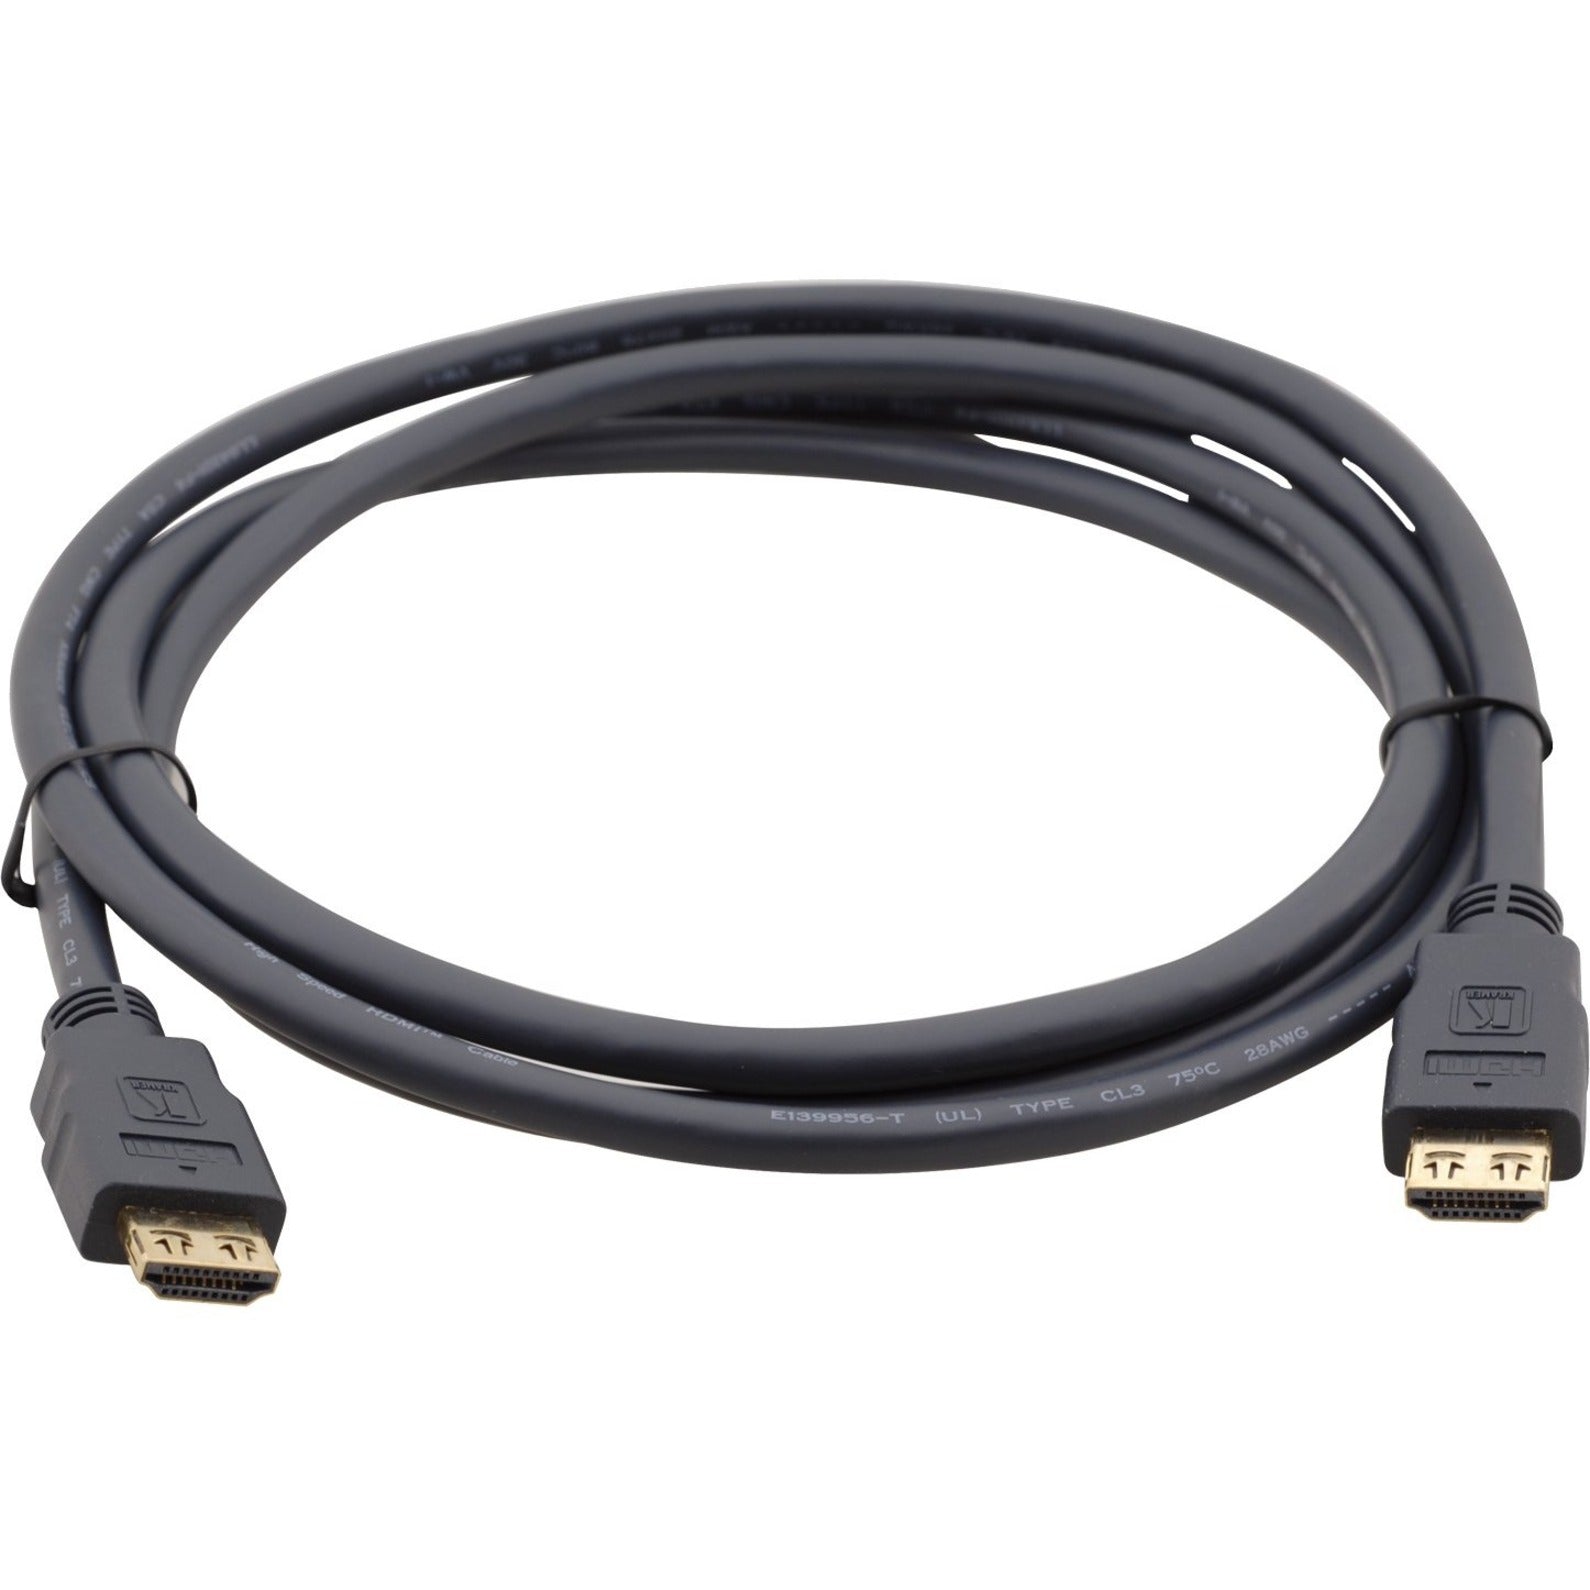 Kramer 97-0101035 Standard HDMI (M) to HDMI (M) Cable, 35 ft, Gold Plated, K-Lock, Molded